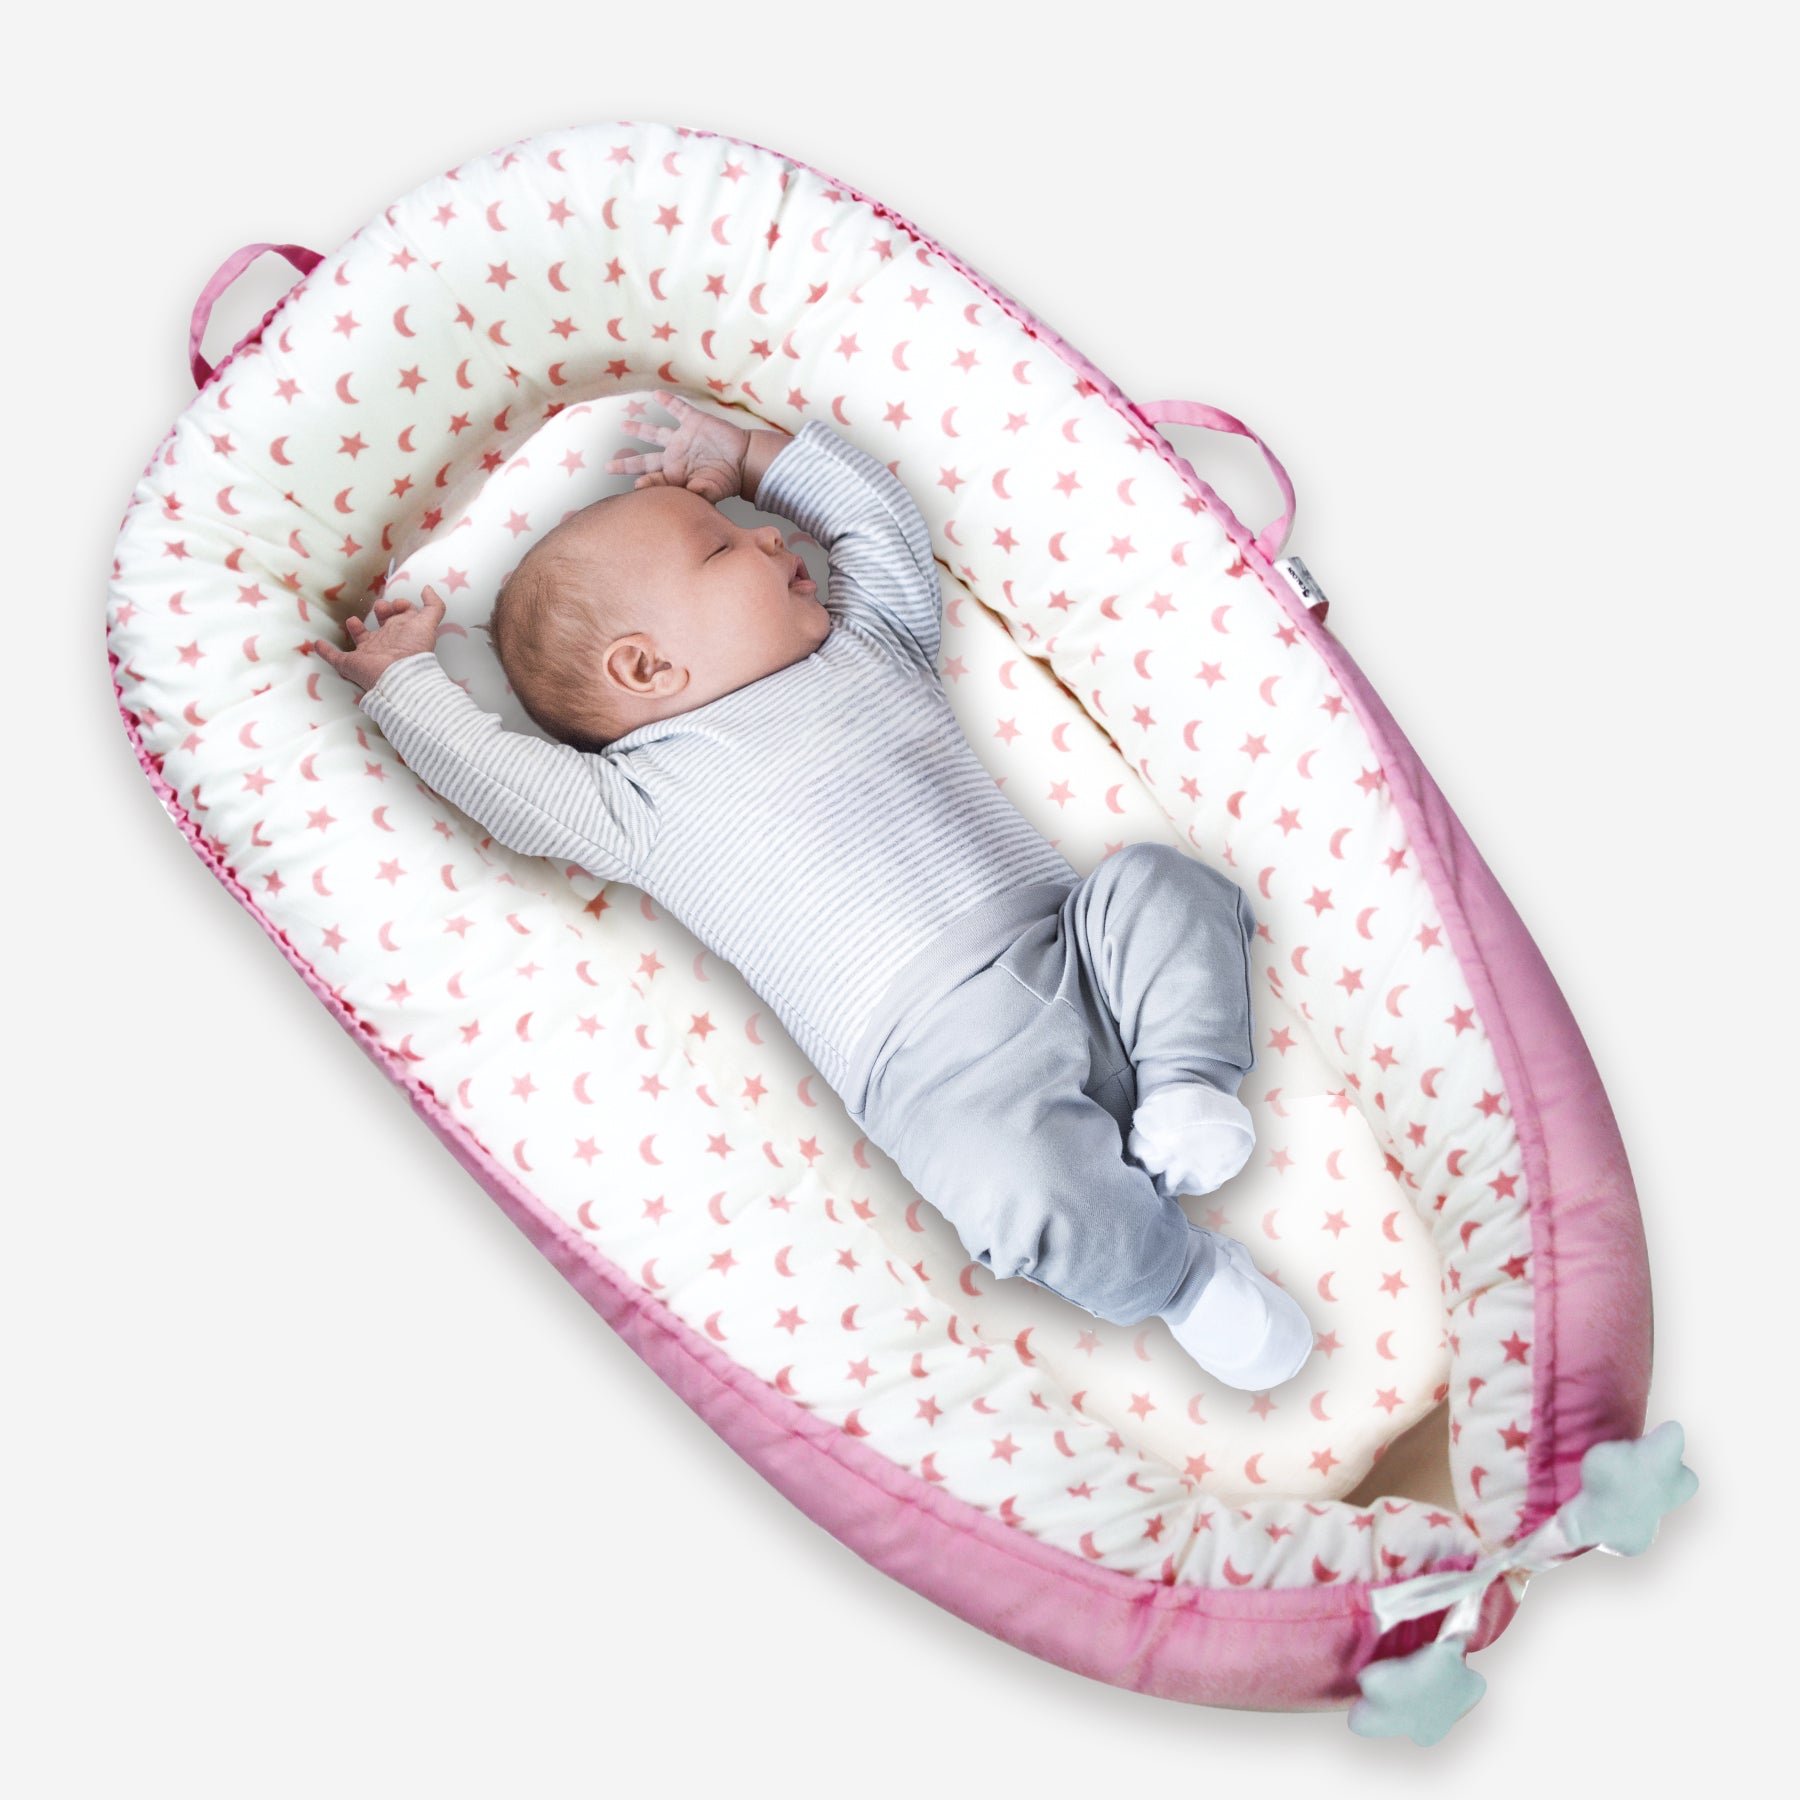 Portable Baby Bassinet Bed Breathable Lounger Crib Sleeping Nest w